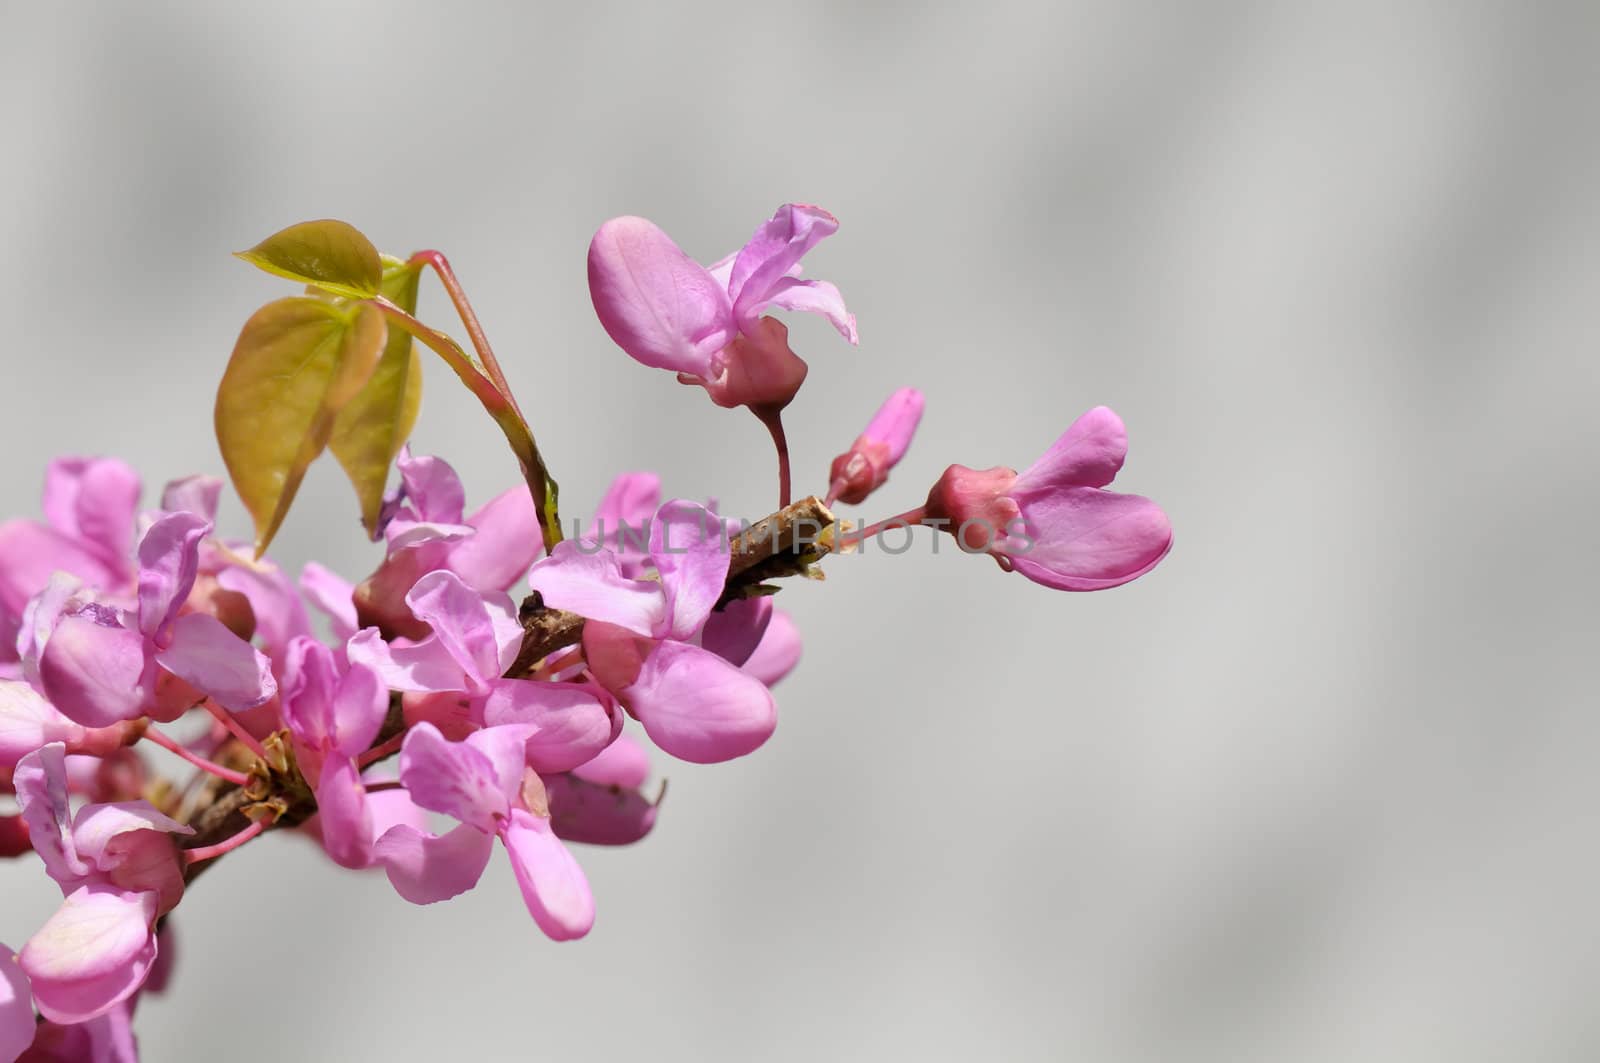 Redbud, also known as Chinese Redbud or Cercis chinensis